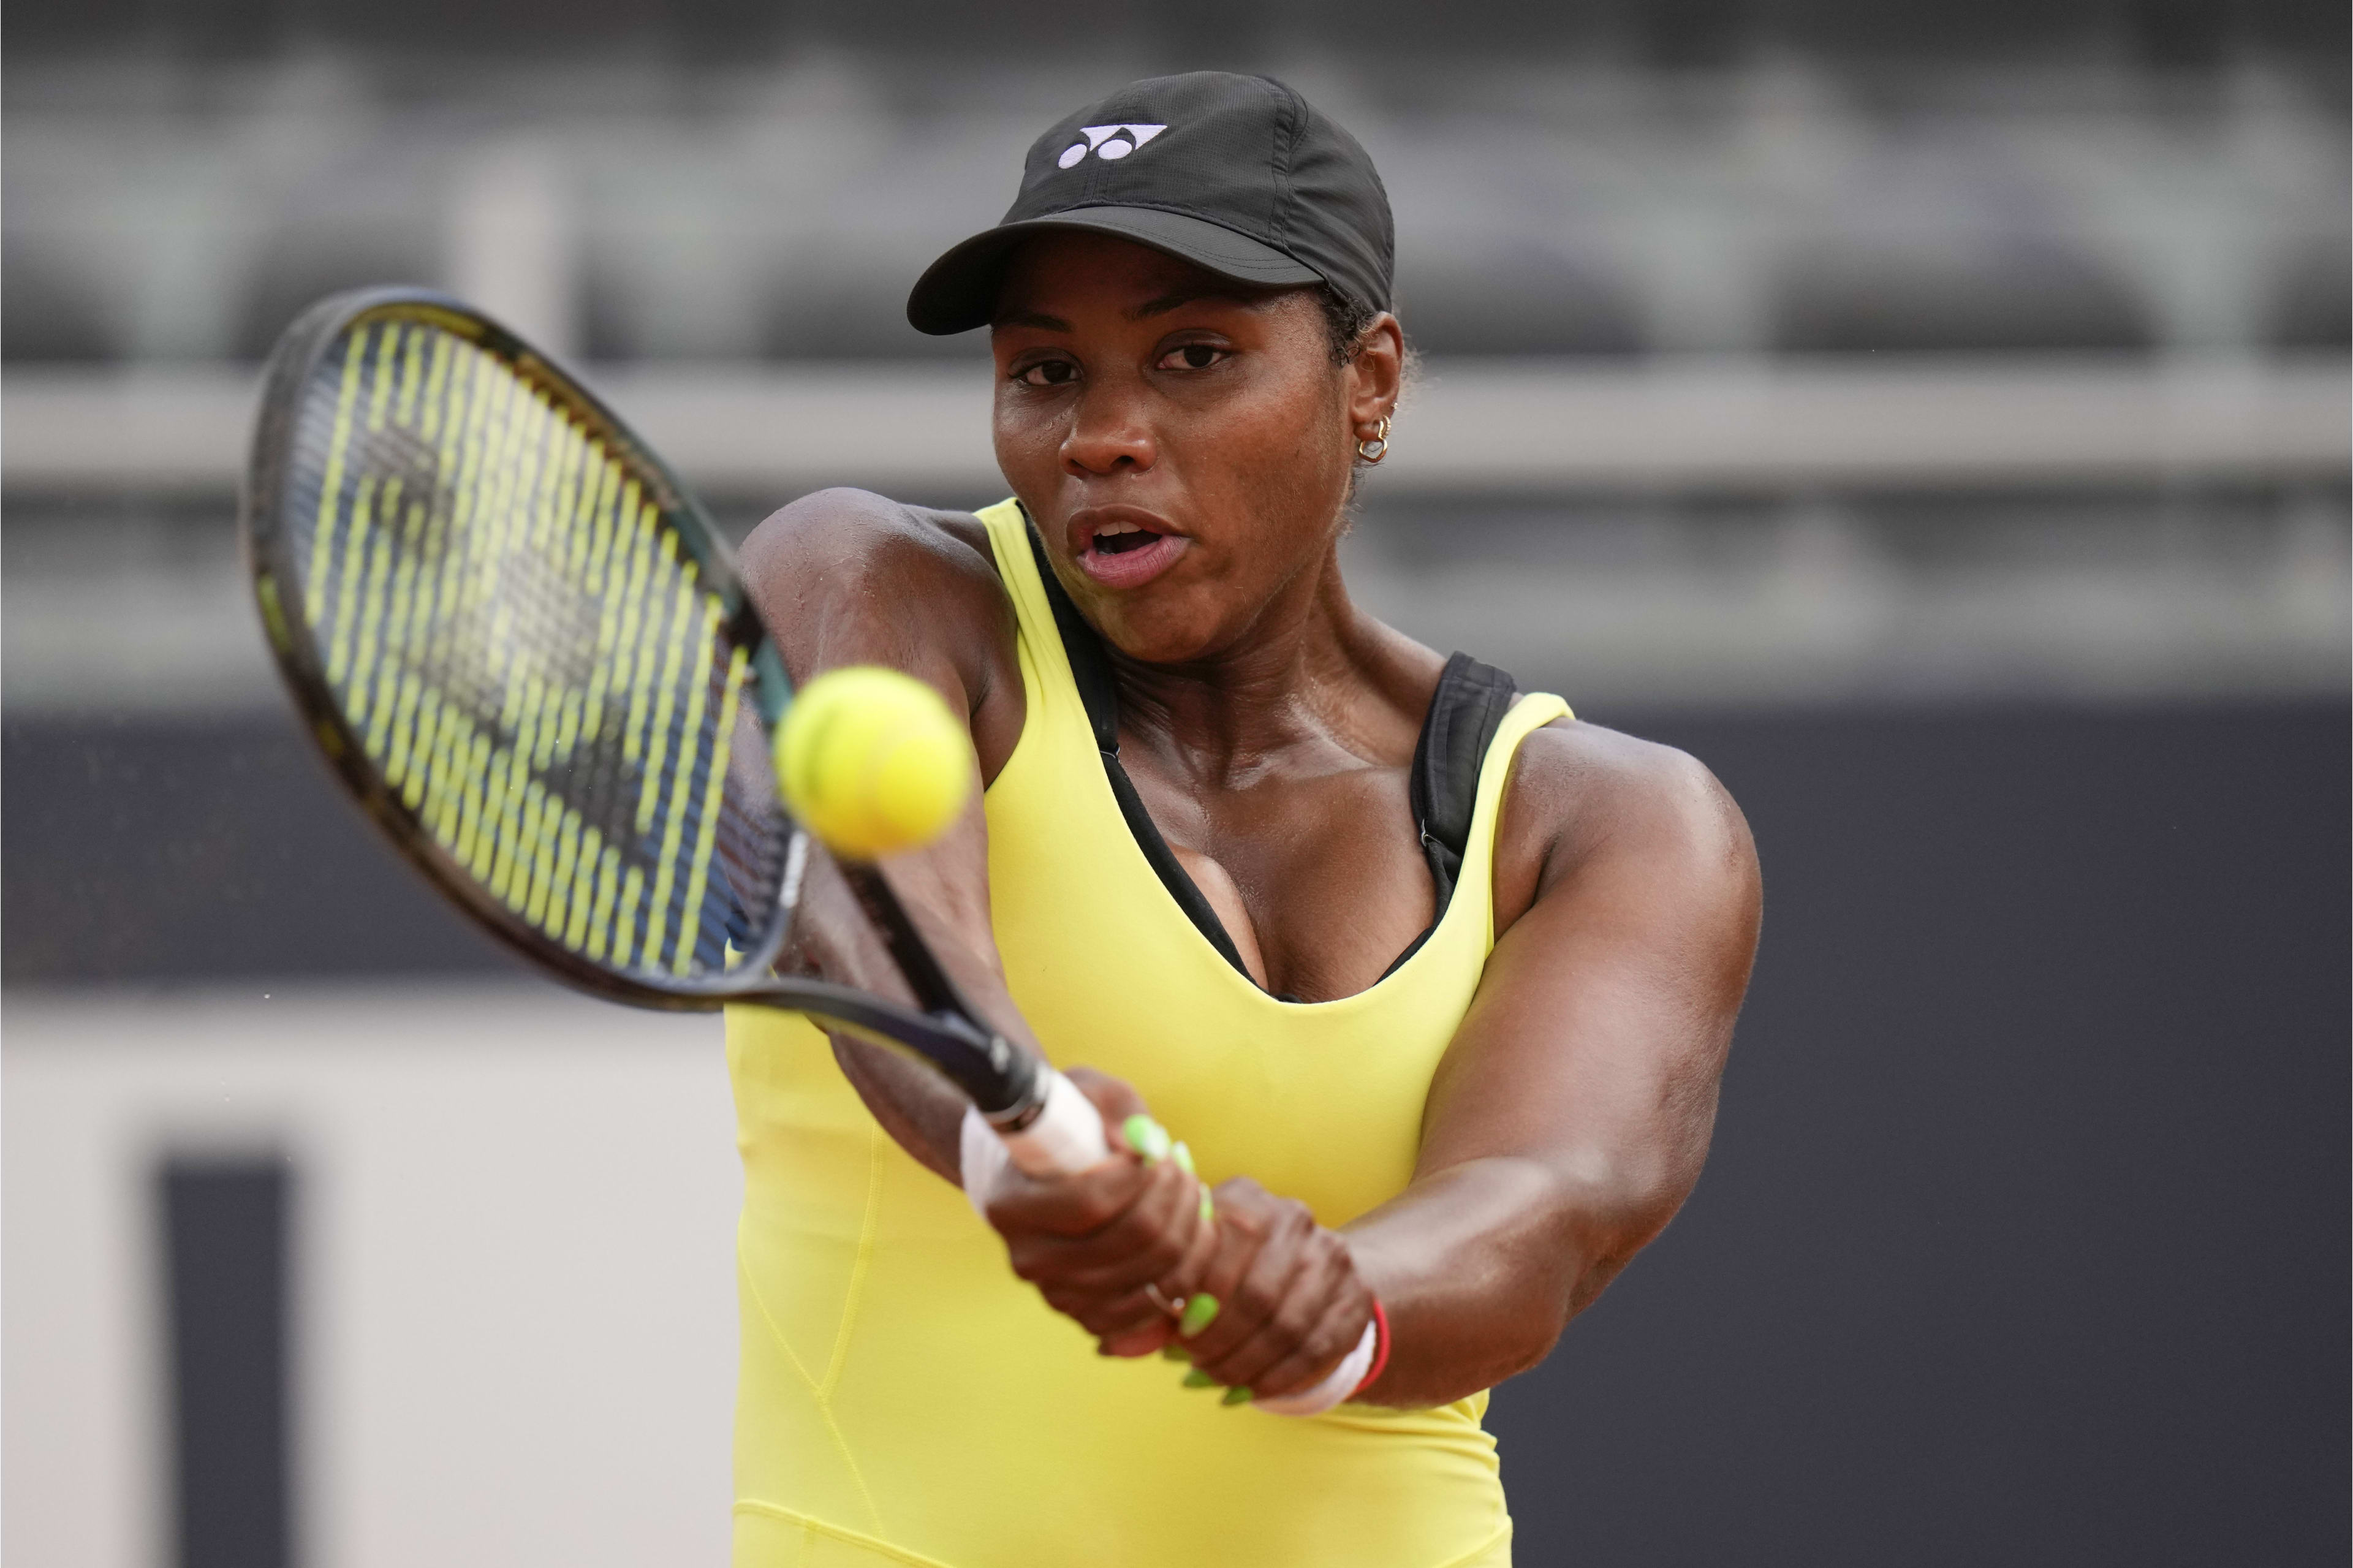 Americans on the comeback Kenin and Townsend produce upset wins at Italian Open